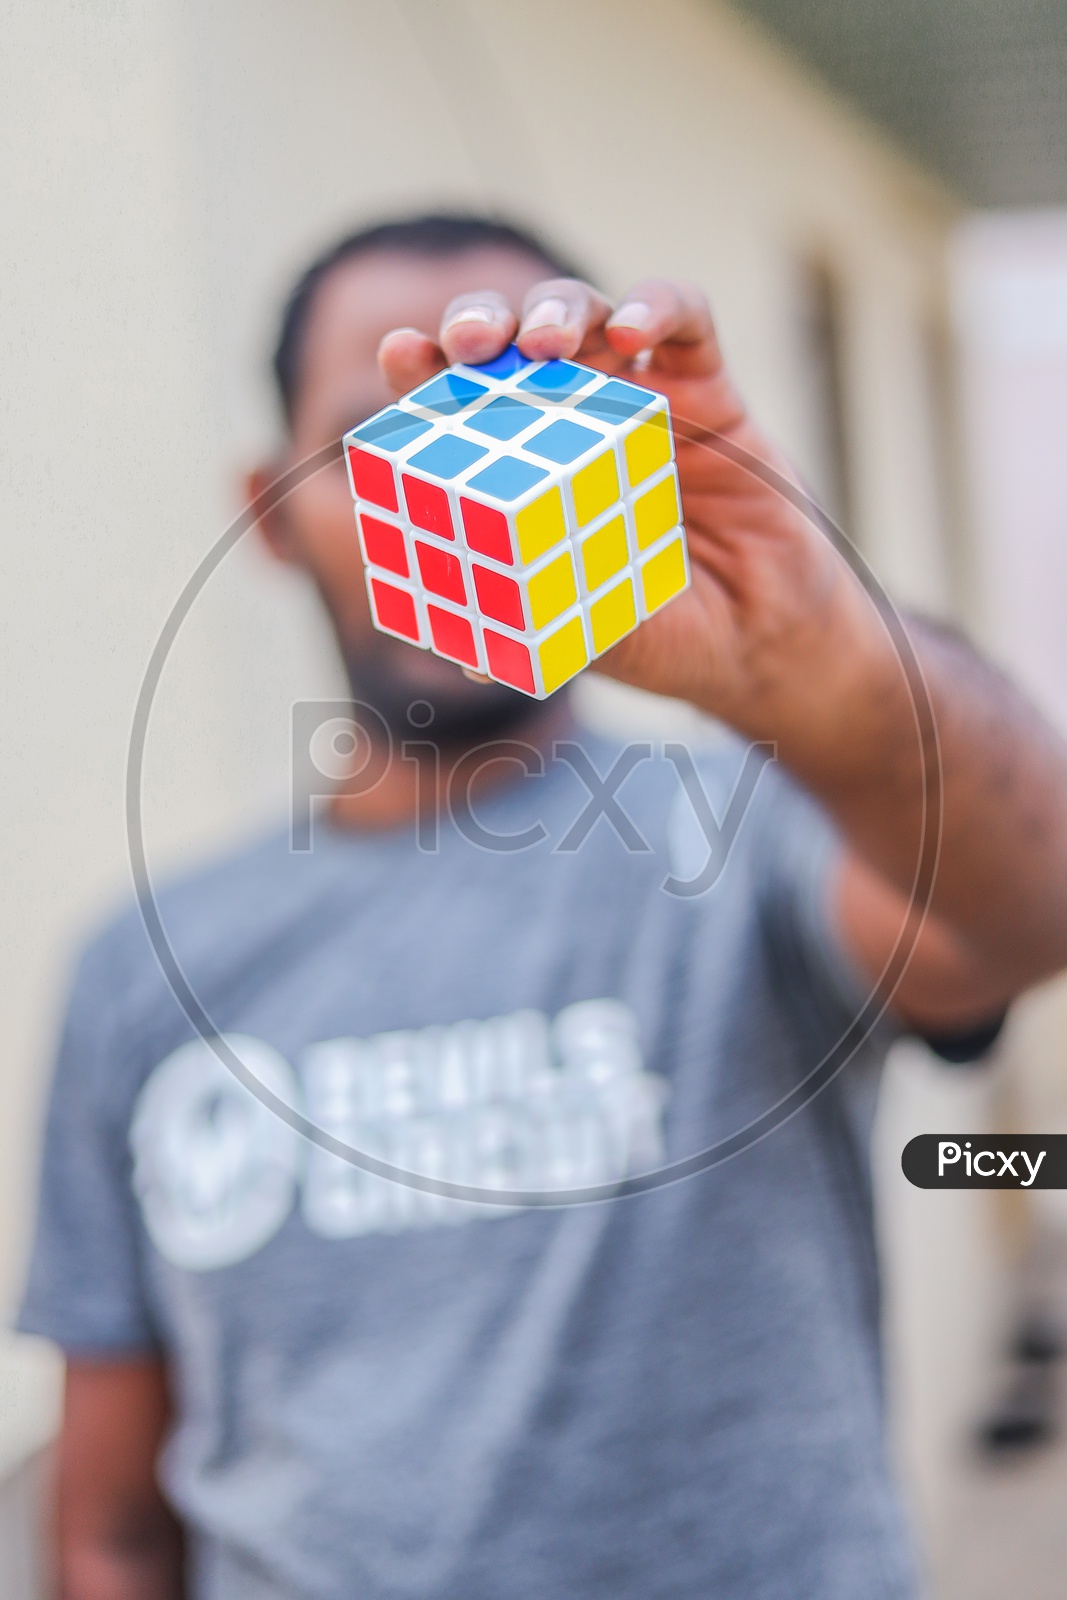 Hands and Rubik's cube puzzle isolated